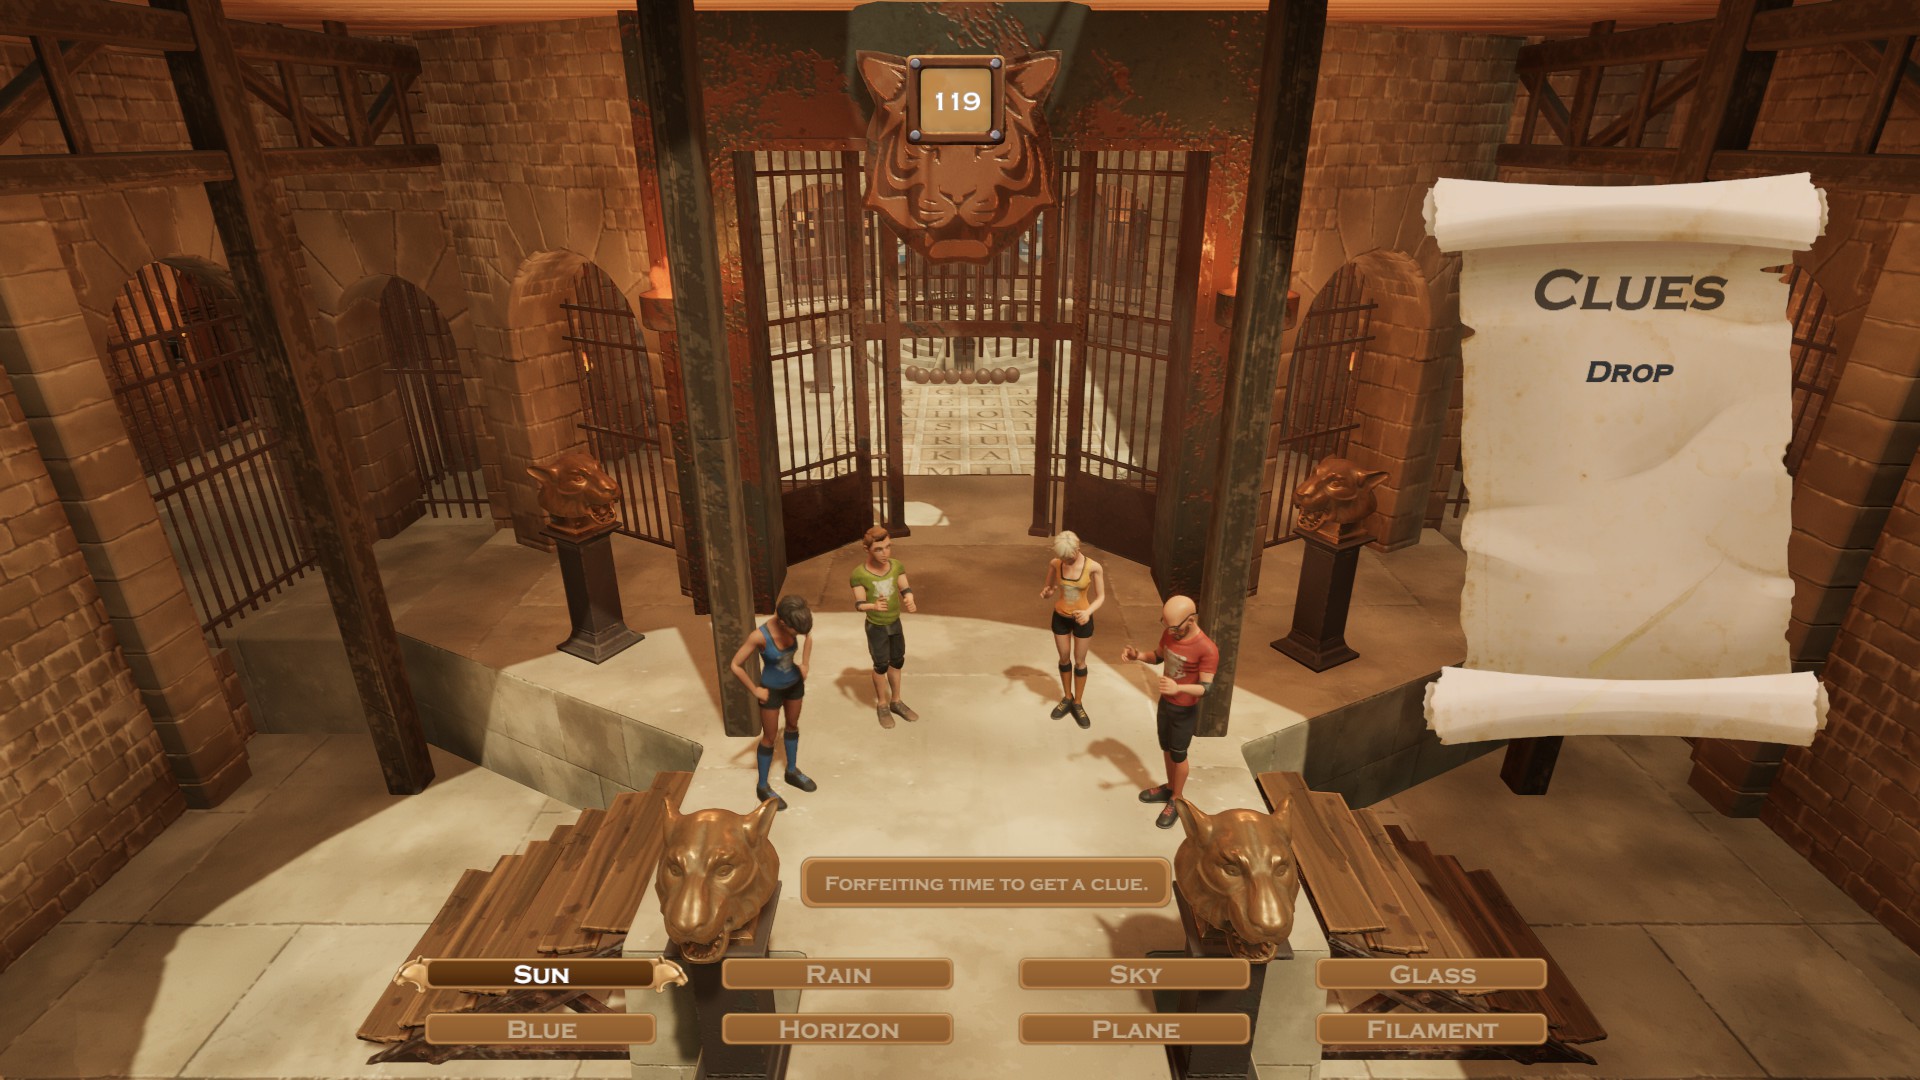 Fort Boyard All Achievement + Game Walkthrough - 2. The Guides to Complete Each Challenge by Difficulty Levels - F41769B